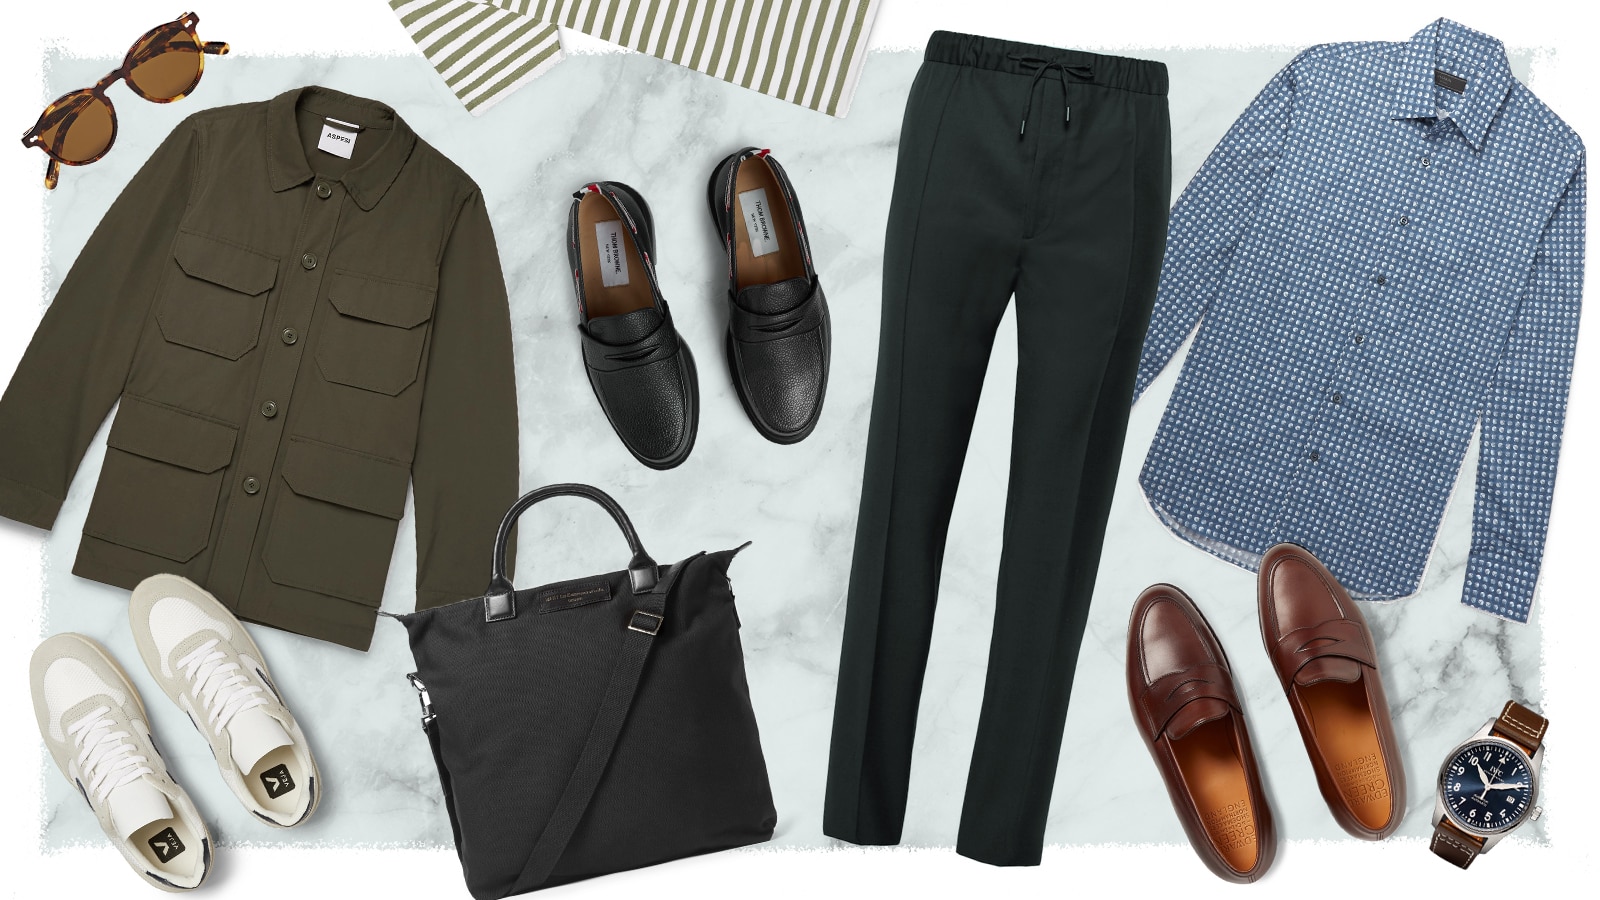 Our Guide To Smart-Casual Dressing For Men | The Journal | MR PORTER